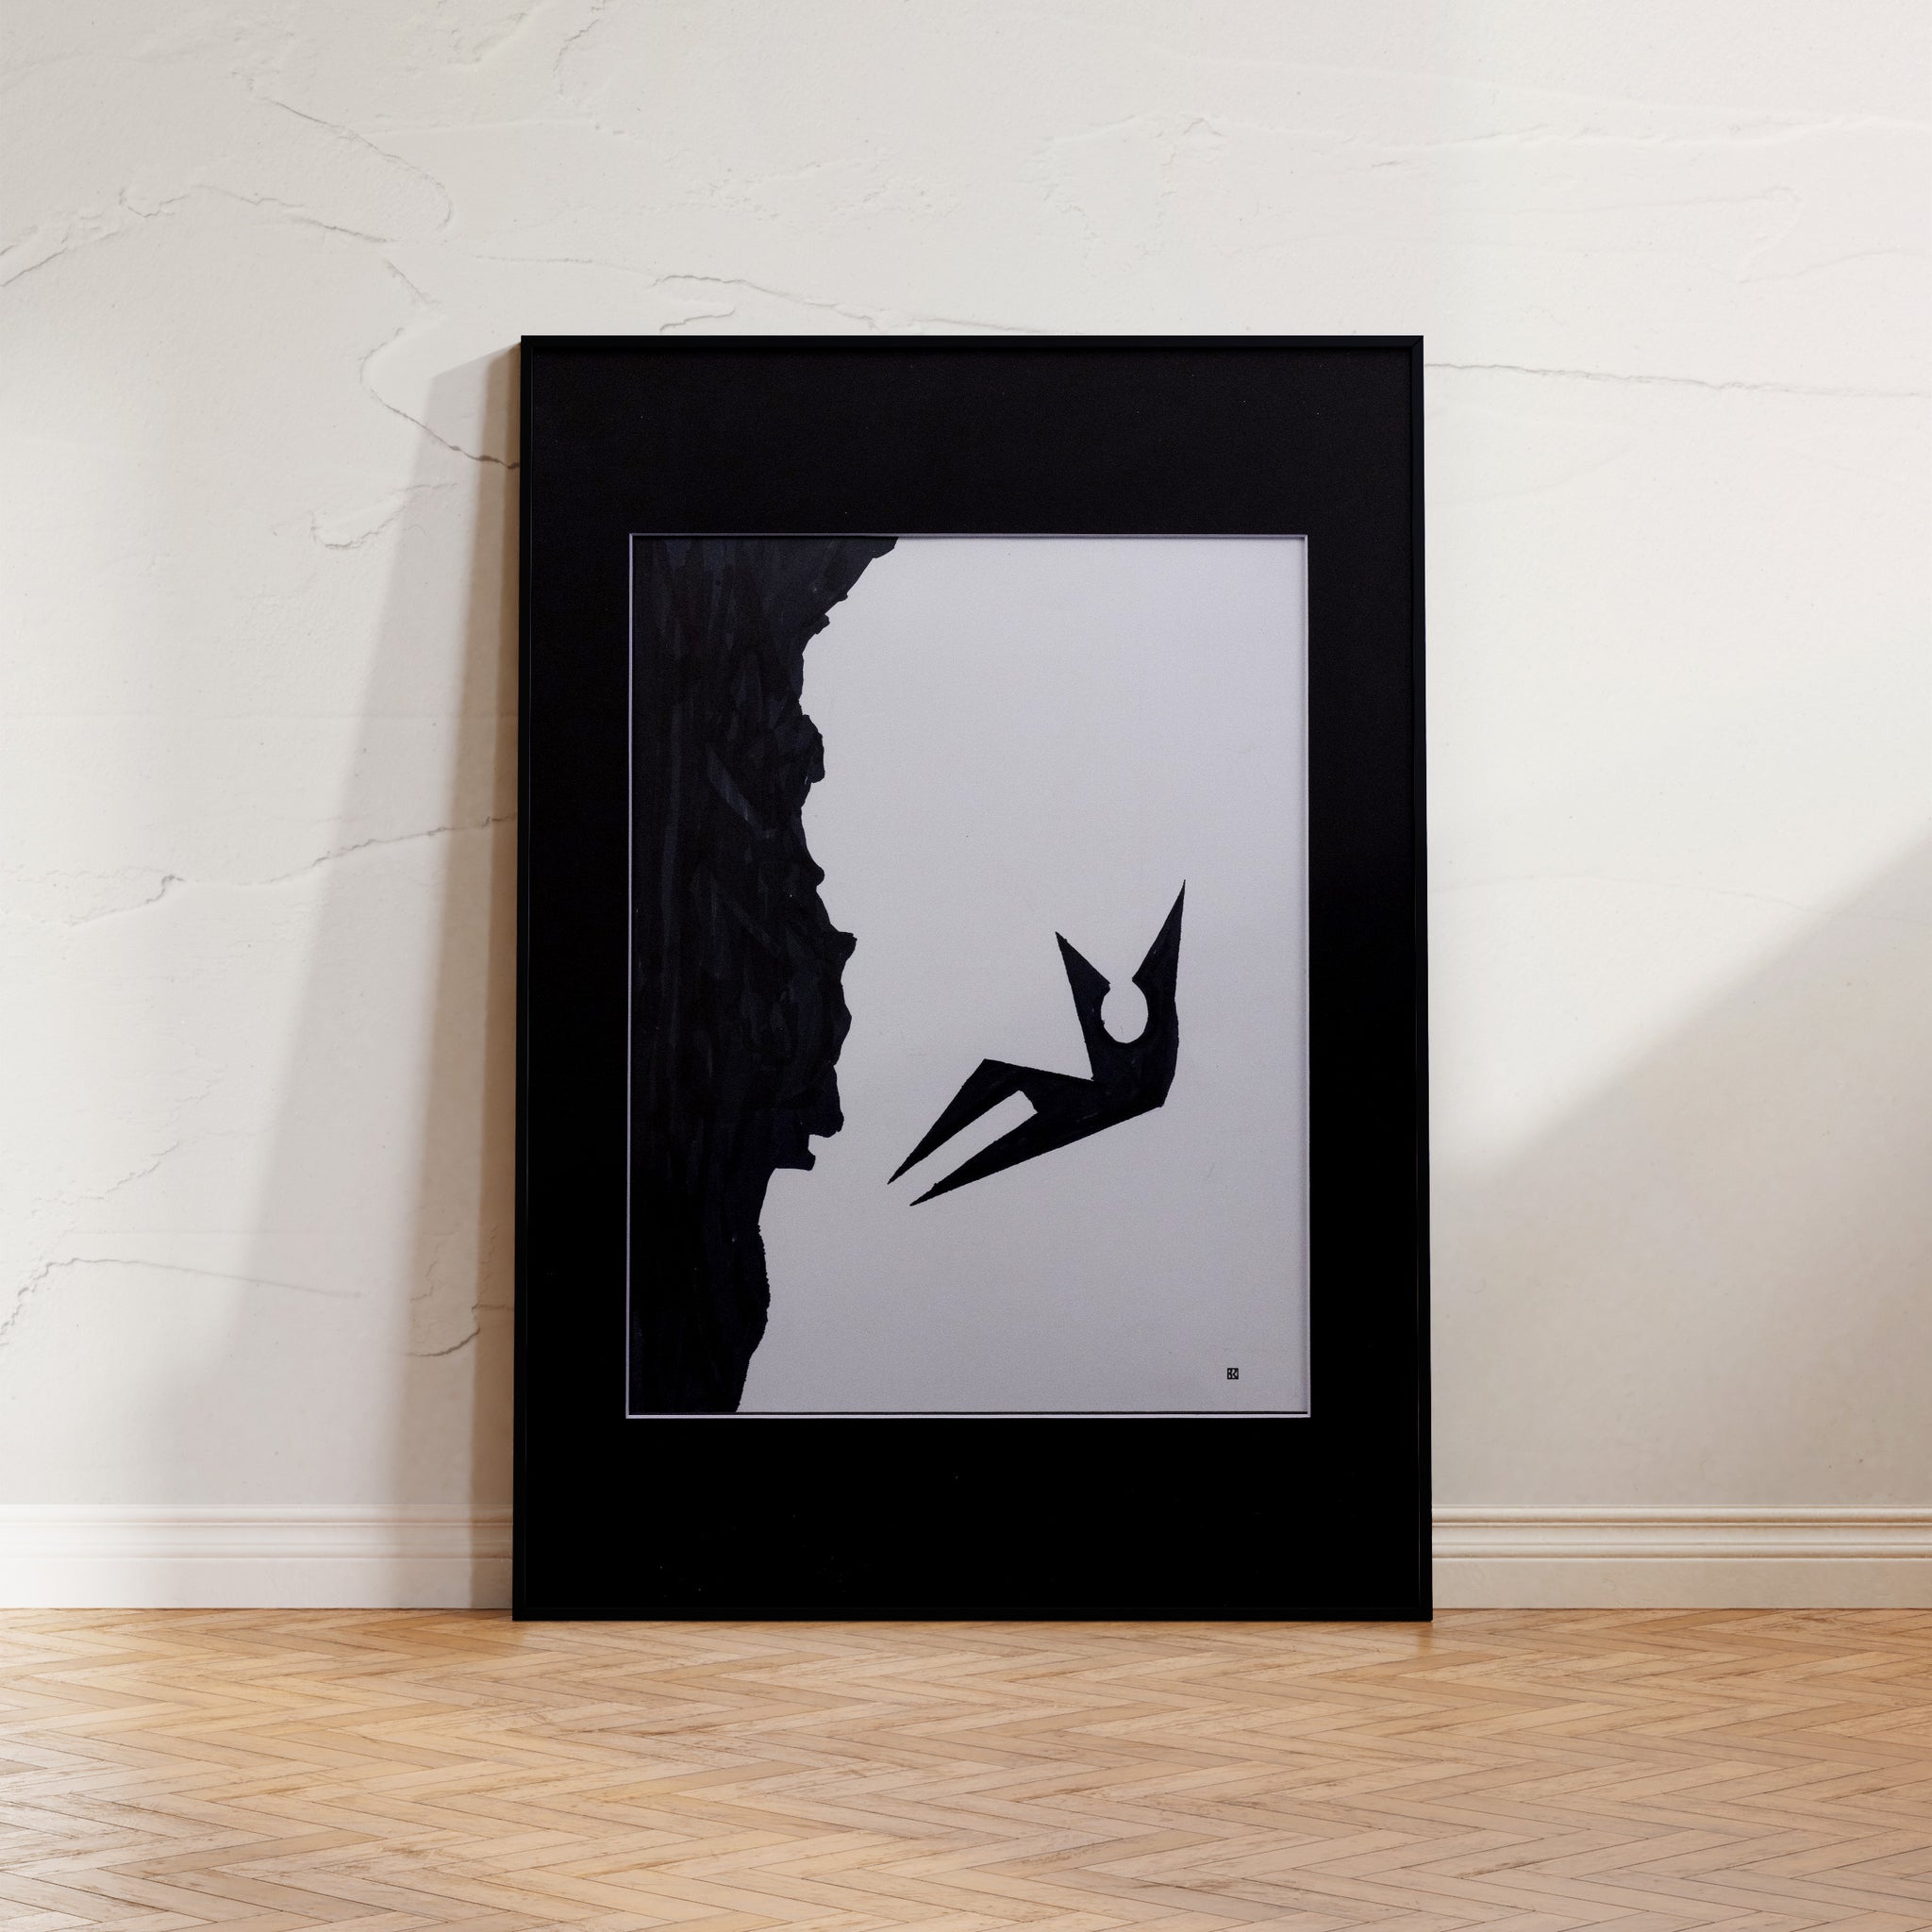 "Descending Figure" is a minimalist black and white print portraying a figure in motion, inviting reflection on themes of trust and liberation.